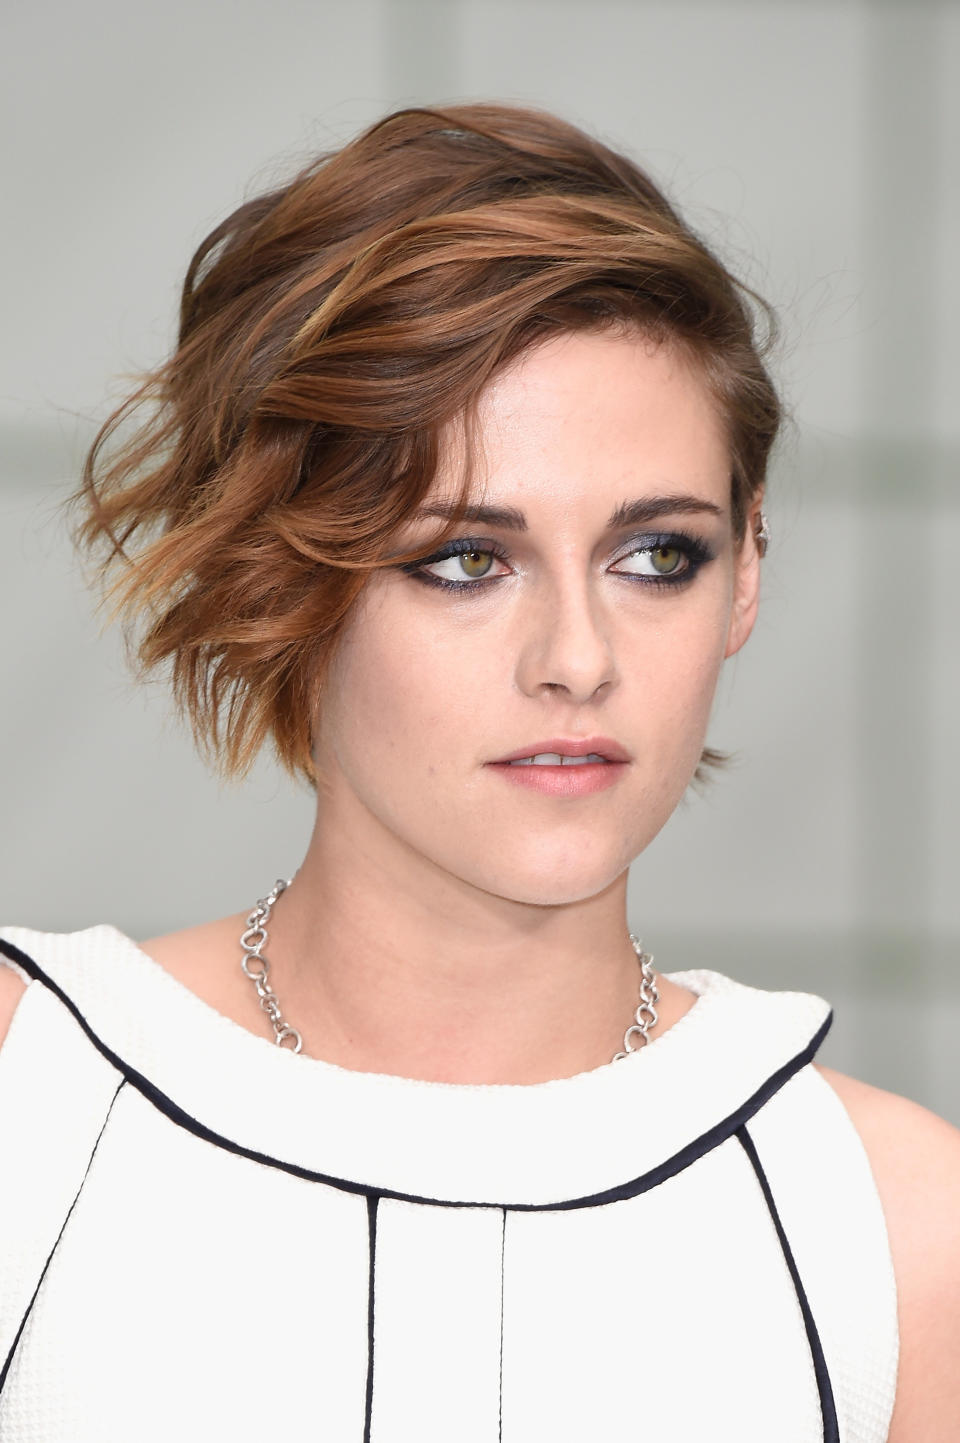 <p>Kristen Stewart is just 25 years old and already has a multi-million-dollar franchise under her belt with the "Twilight" series.&nbsp;</p>